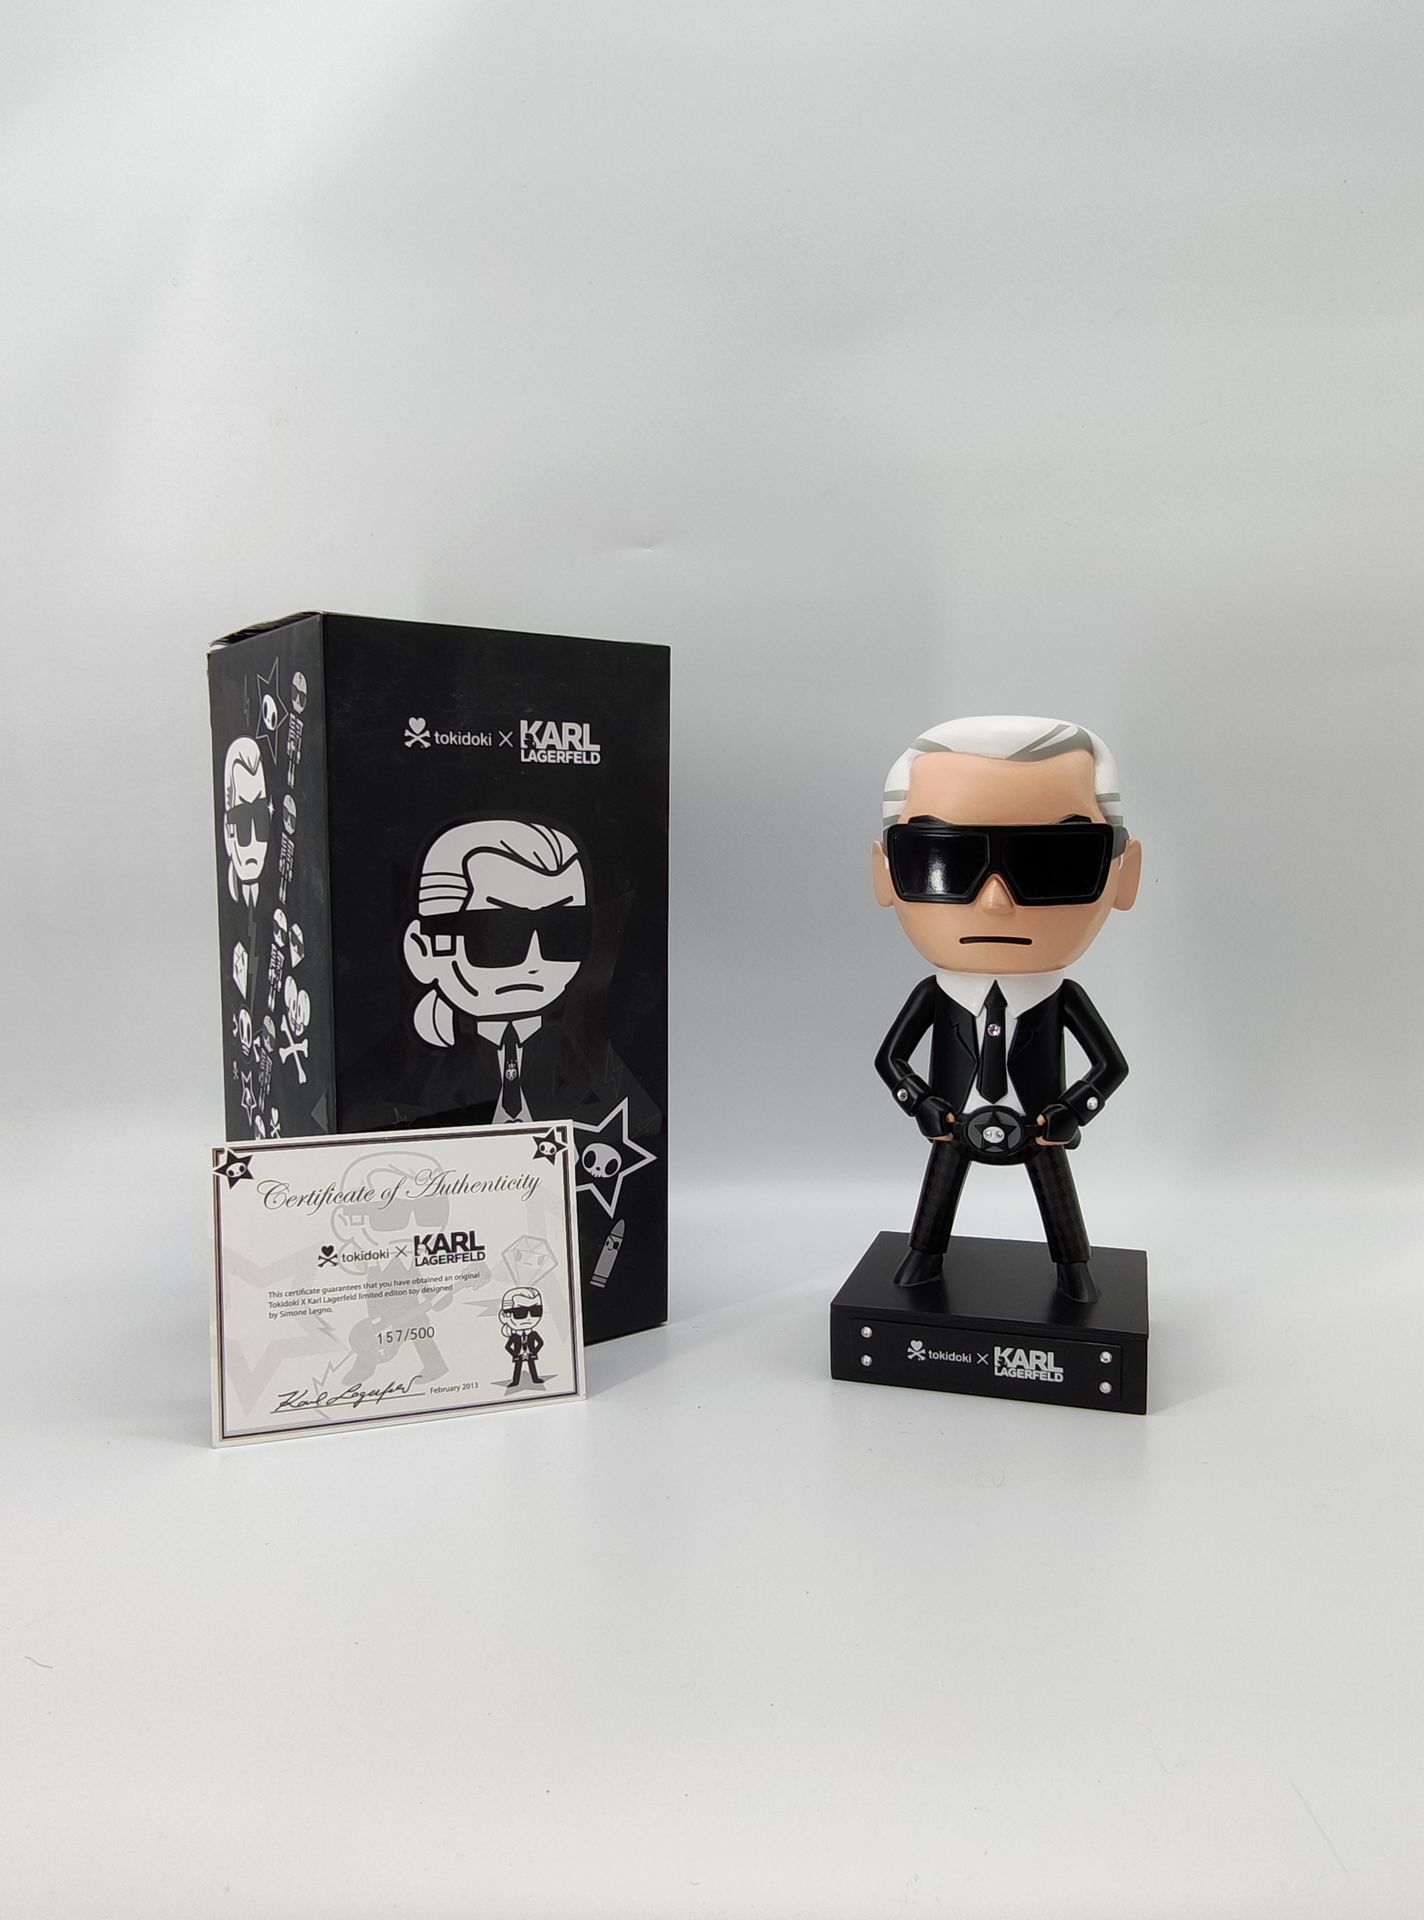 Null Tokidoki X Karl Lagerfeld.
Kl strass.
With authenticity card, numbered 157/&hellip;